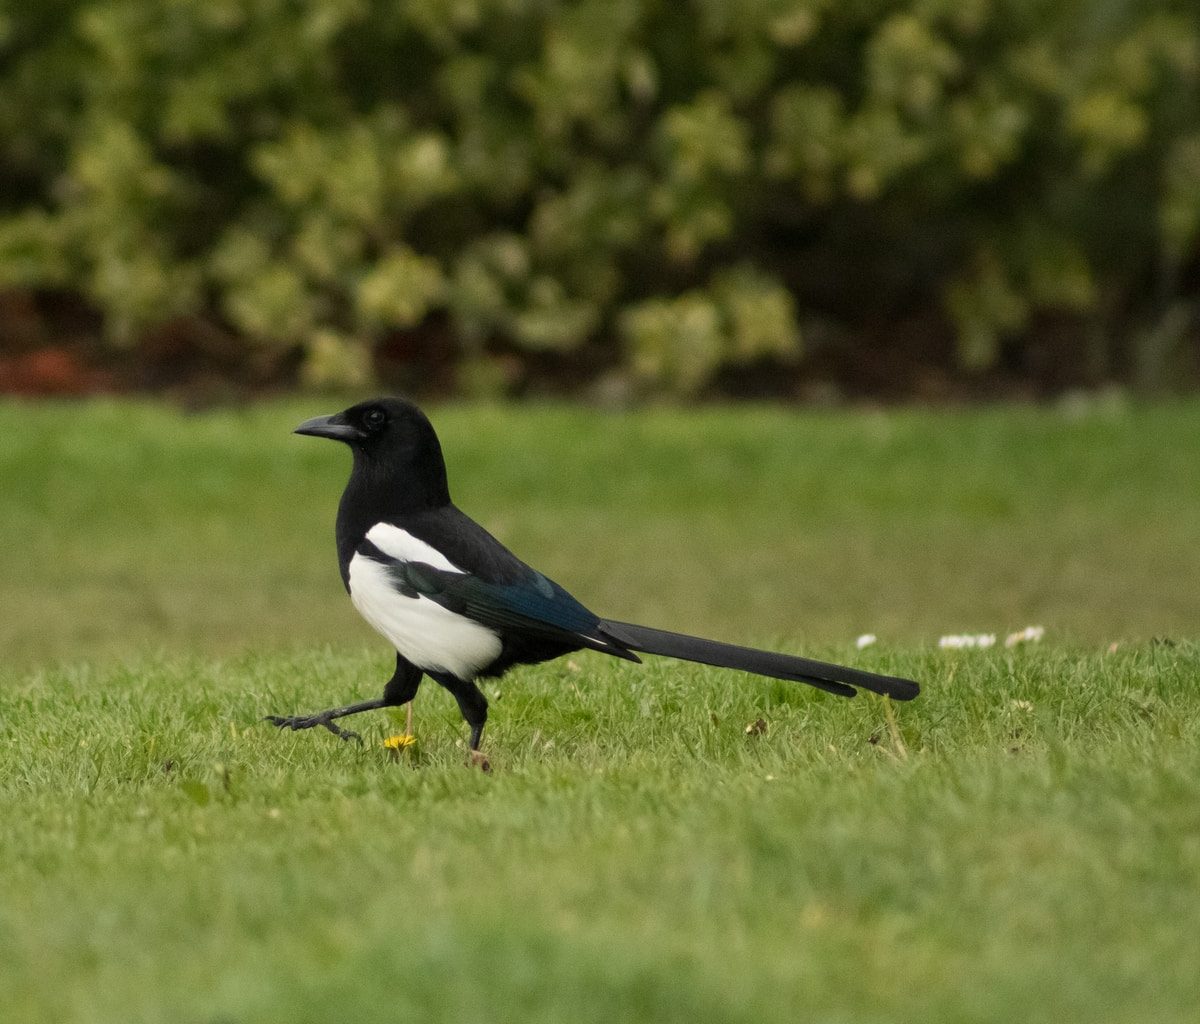 black and white bird on green grass during daytime